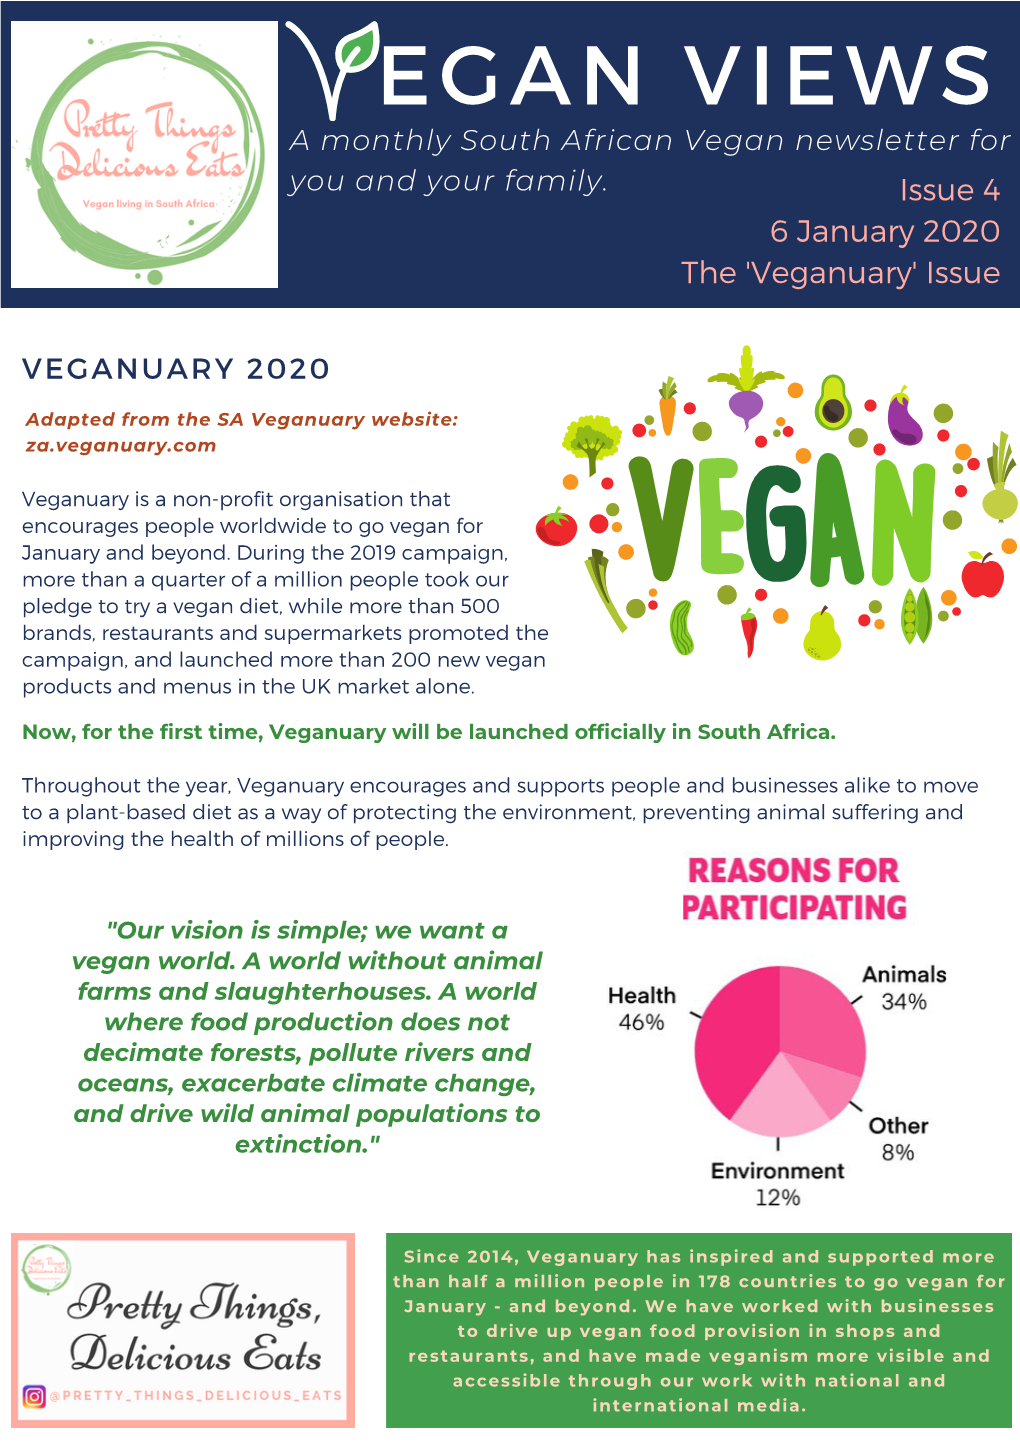 EGAN VIEWS a Monthly South African Vegan Newsletter for You and Your Family